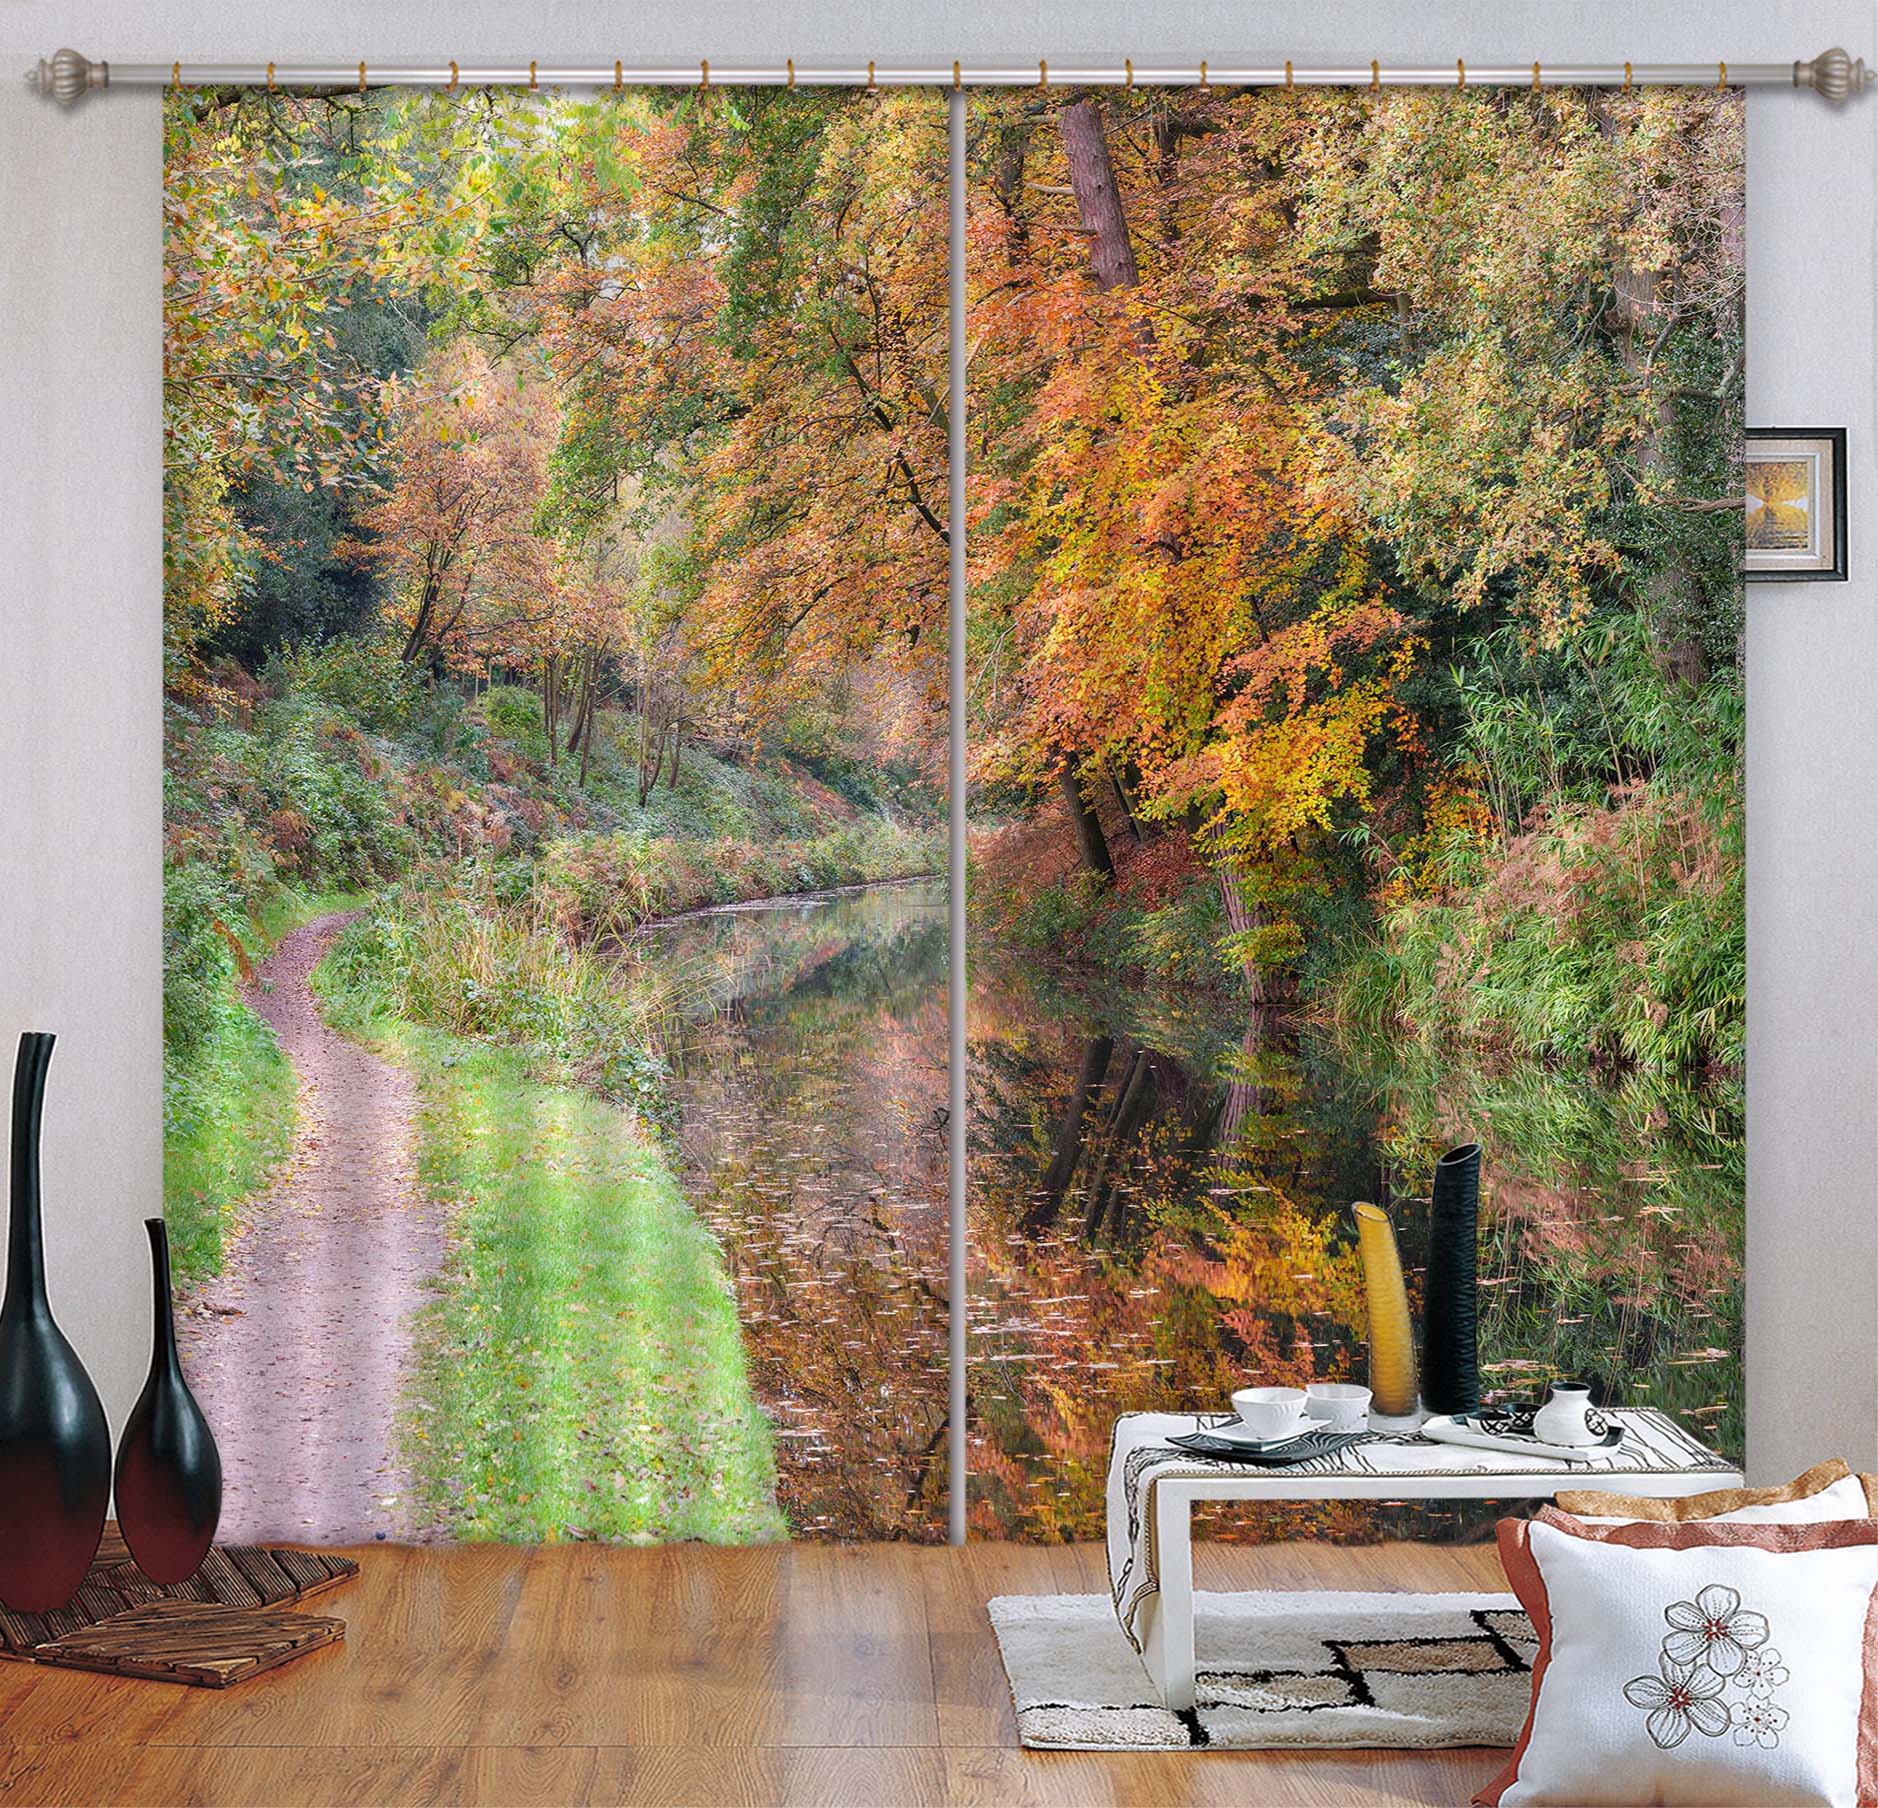 3D Withered Leaves 6358 Assaf Frank Curtain Curtains Drapes